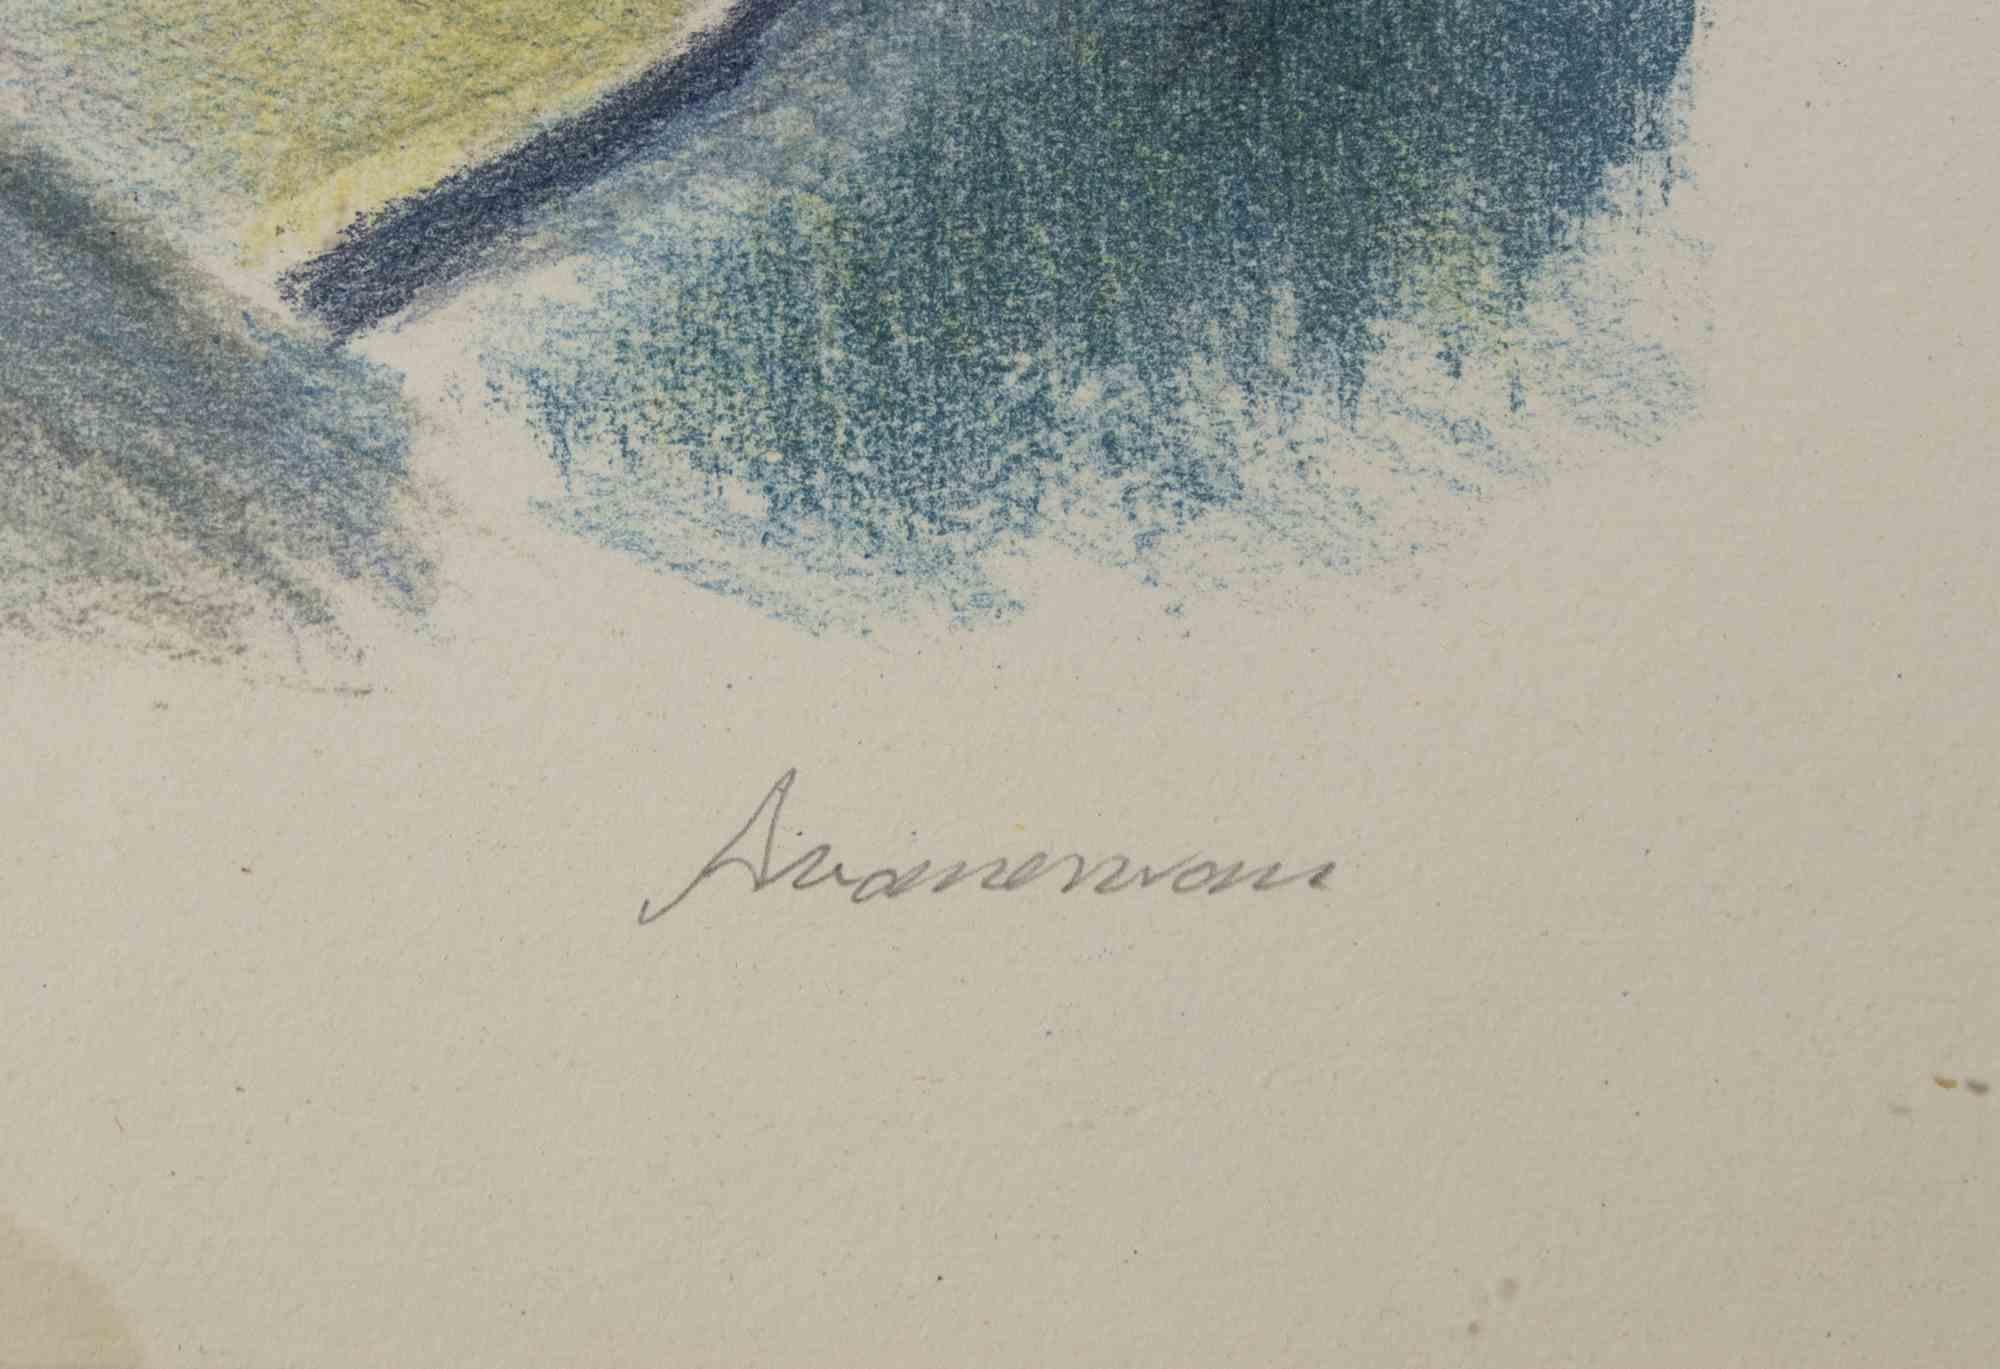 Landscape is an original lithograph realized by Alfonso Avanessian in 1970's

Hand-signed on the lower right: Avanessian

Artist's proof (as reported on the lower left margin)

Good conditions except for some stains 

Includes wooden frame: 58.5 x